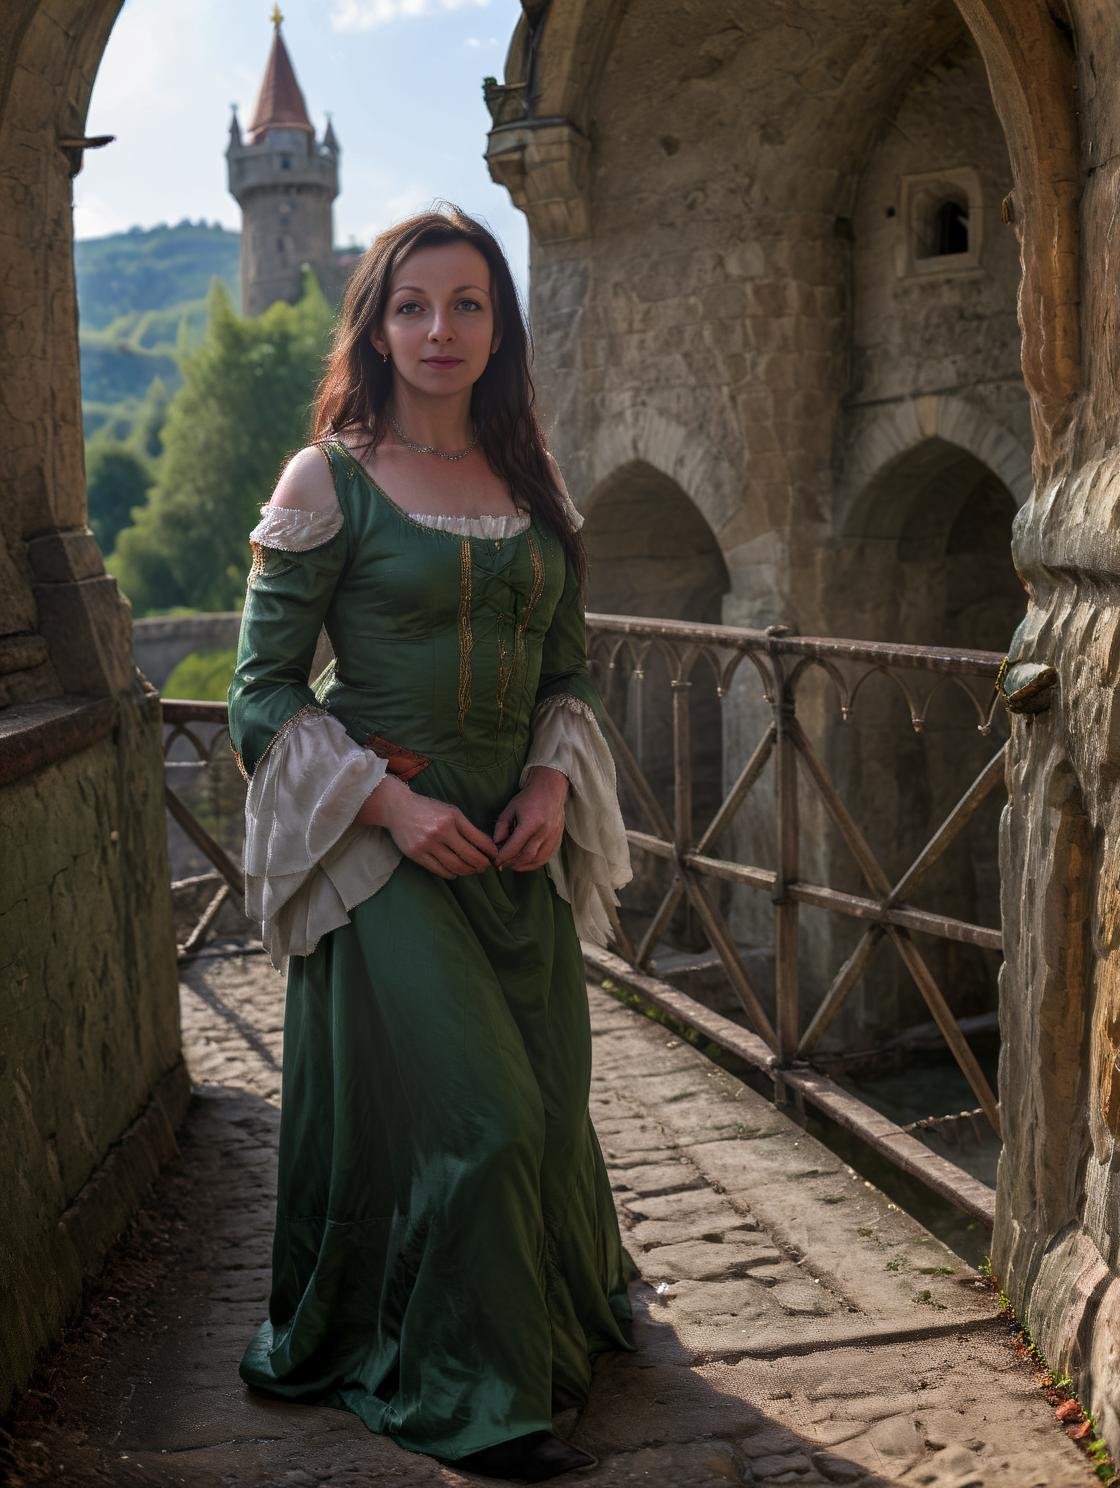 Hyperrealistic art beautiful cute 40 y.o. <lora:Mjulla_XL:1.2> Julka girl  is standing next to castle bridge, wearing green baroque dress, castle in background . Extremely high-resolution details, photographic, realism pushed to extreme, fine texture, incredibly lifelike  <lora:polyhedron_god rays-000007:0.4> <lora:Castle_manor:0.6>